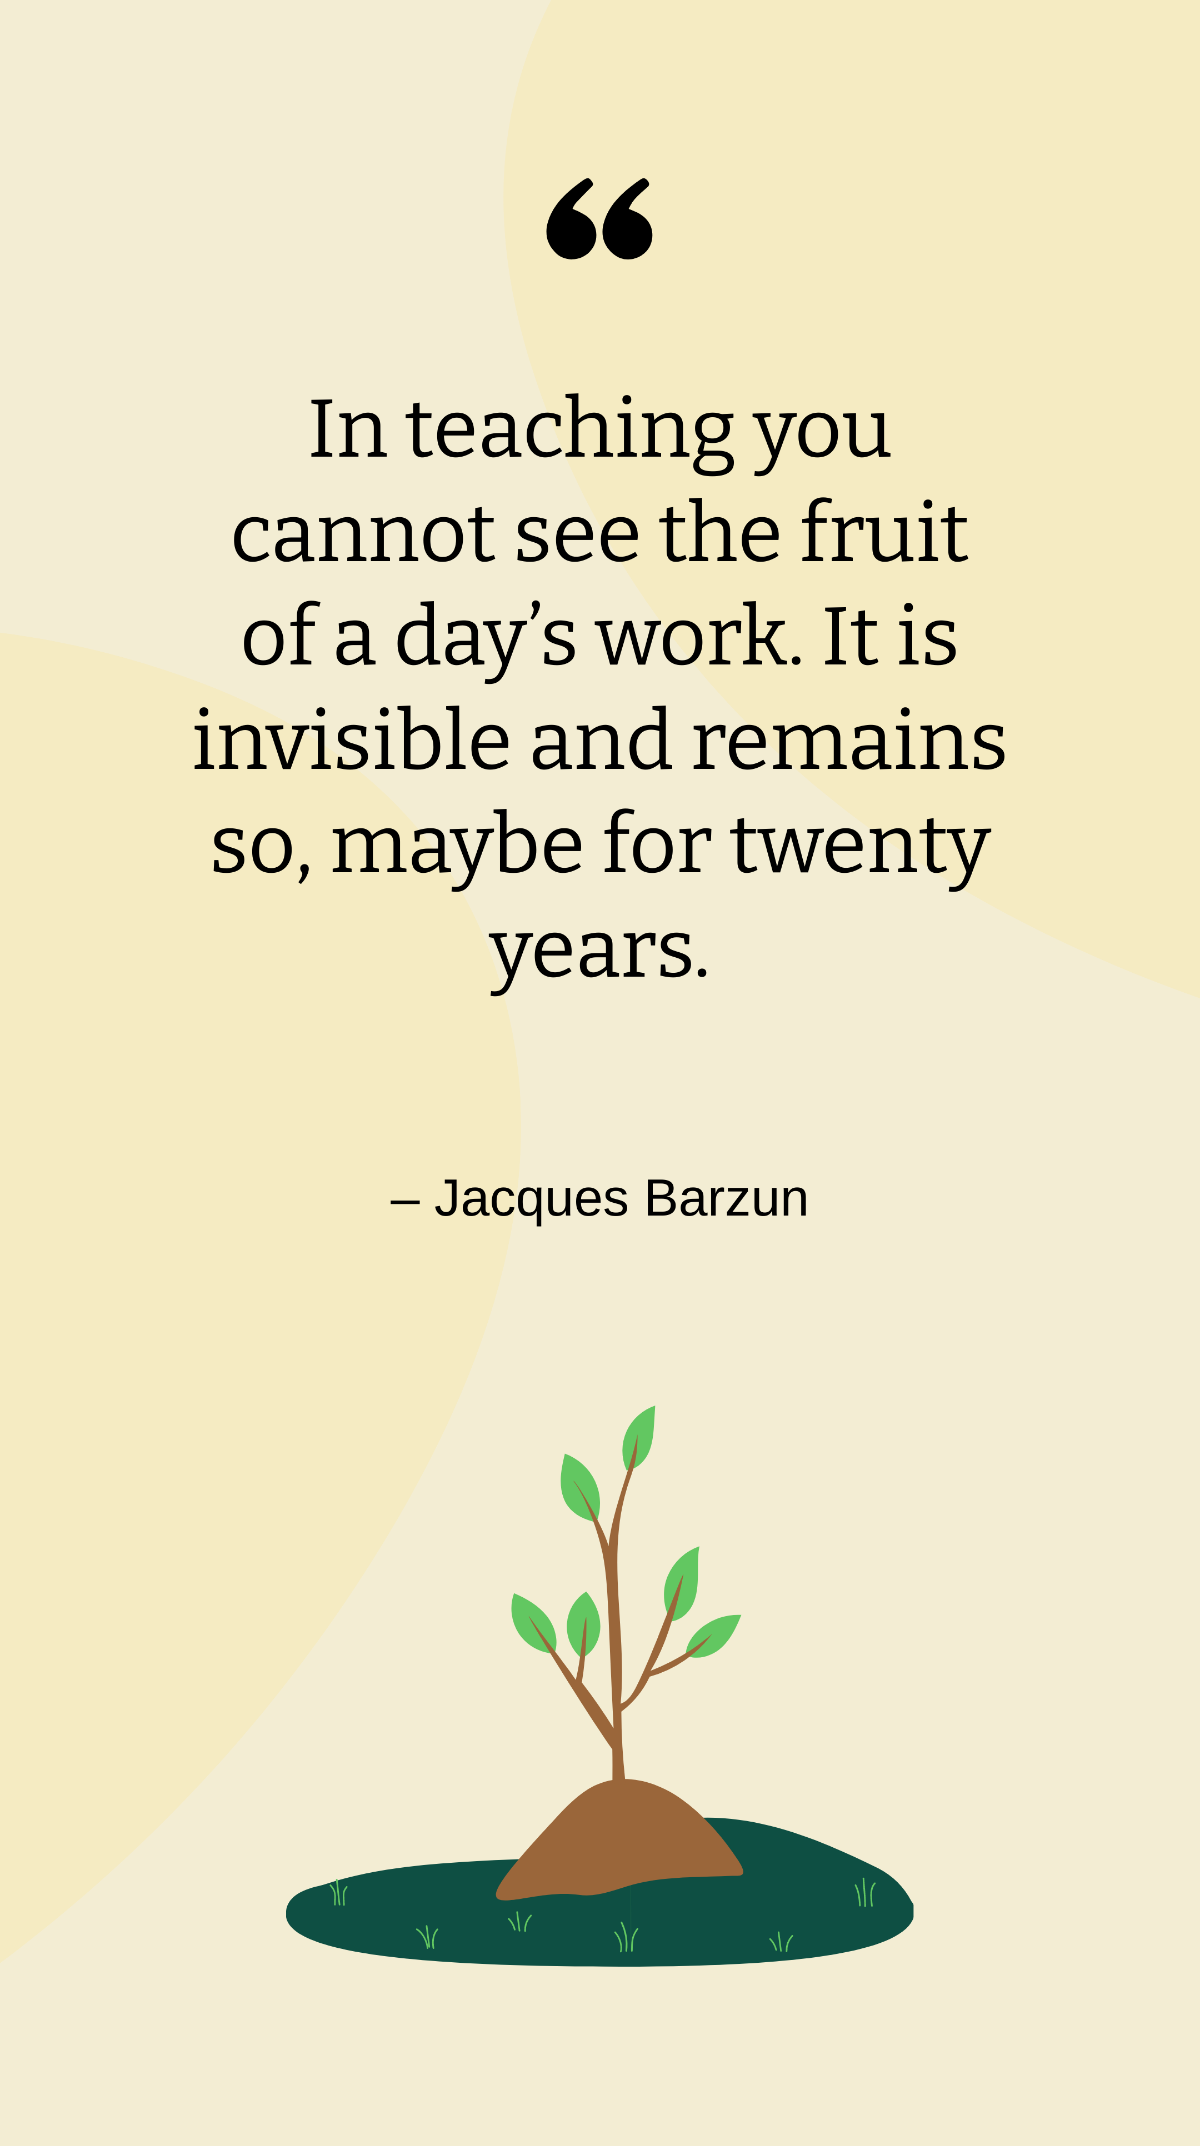 Jacques Barzun - In teaching you cannot see the fruit of a day’s work. It is invisible and remains so, maybe for twenty years. Template